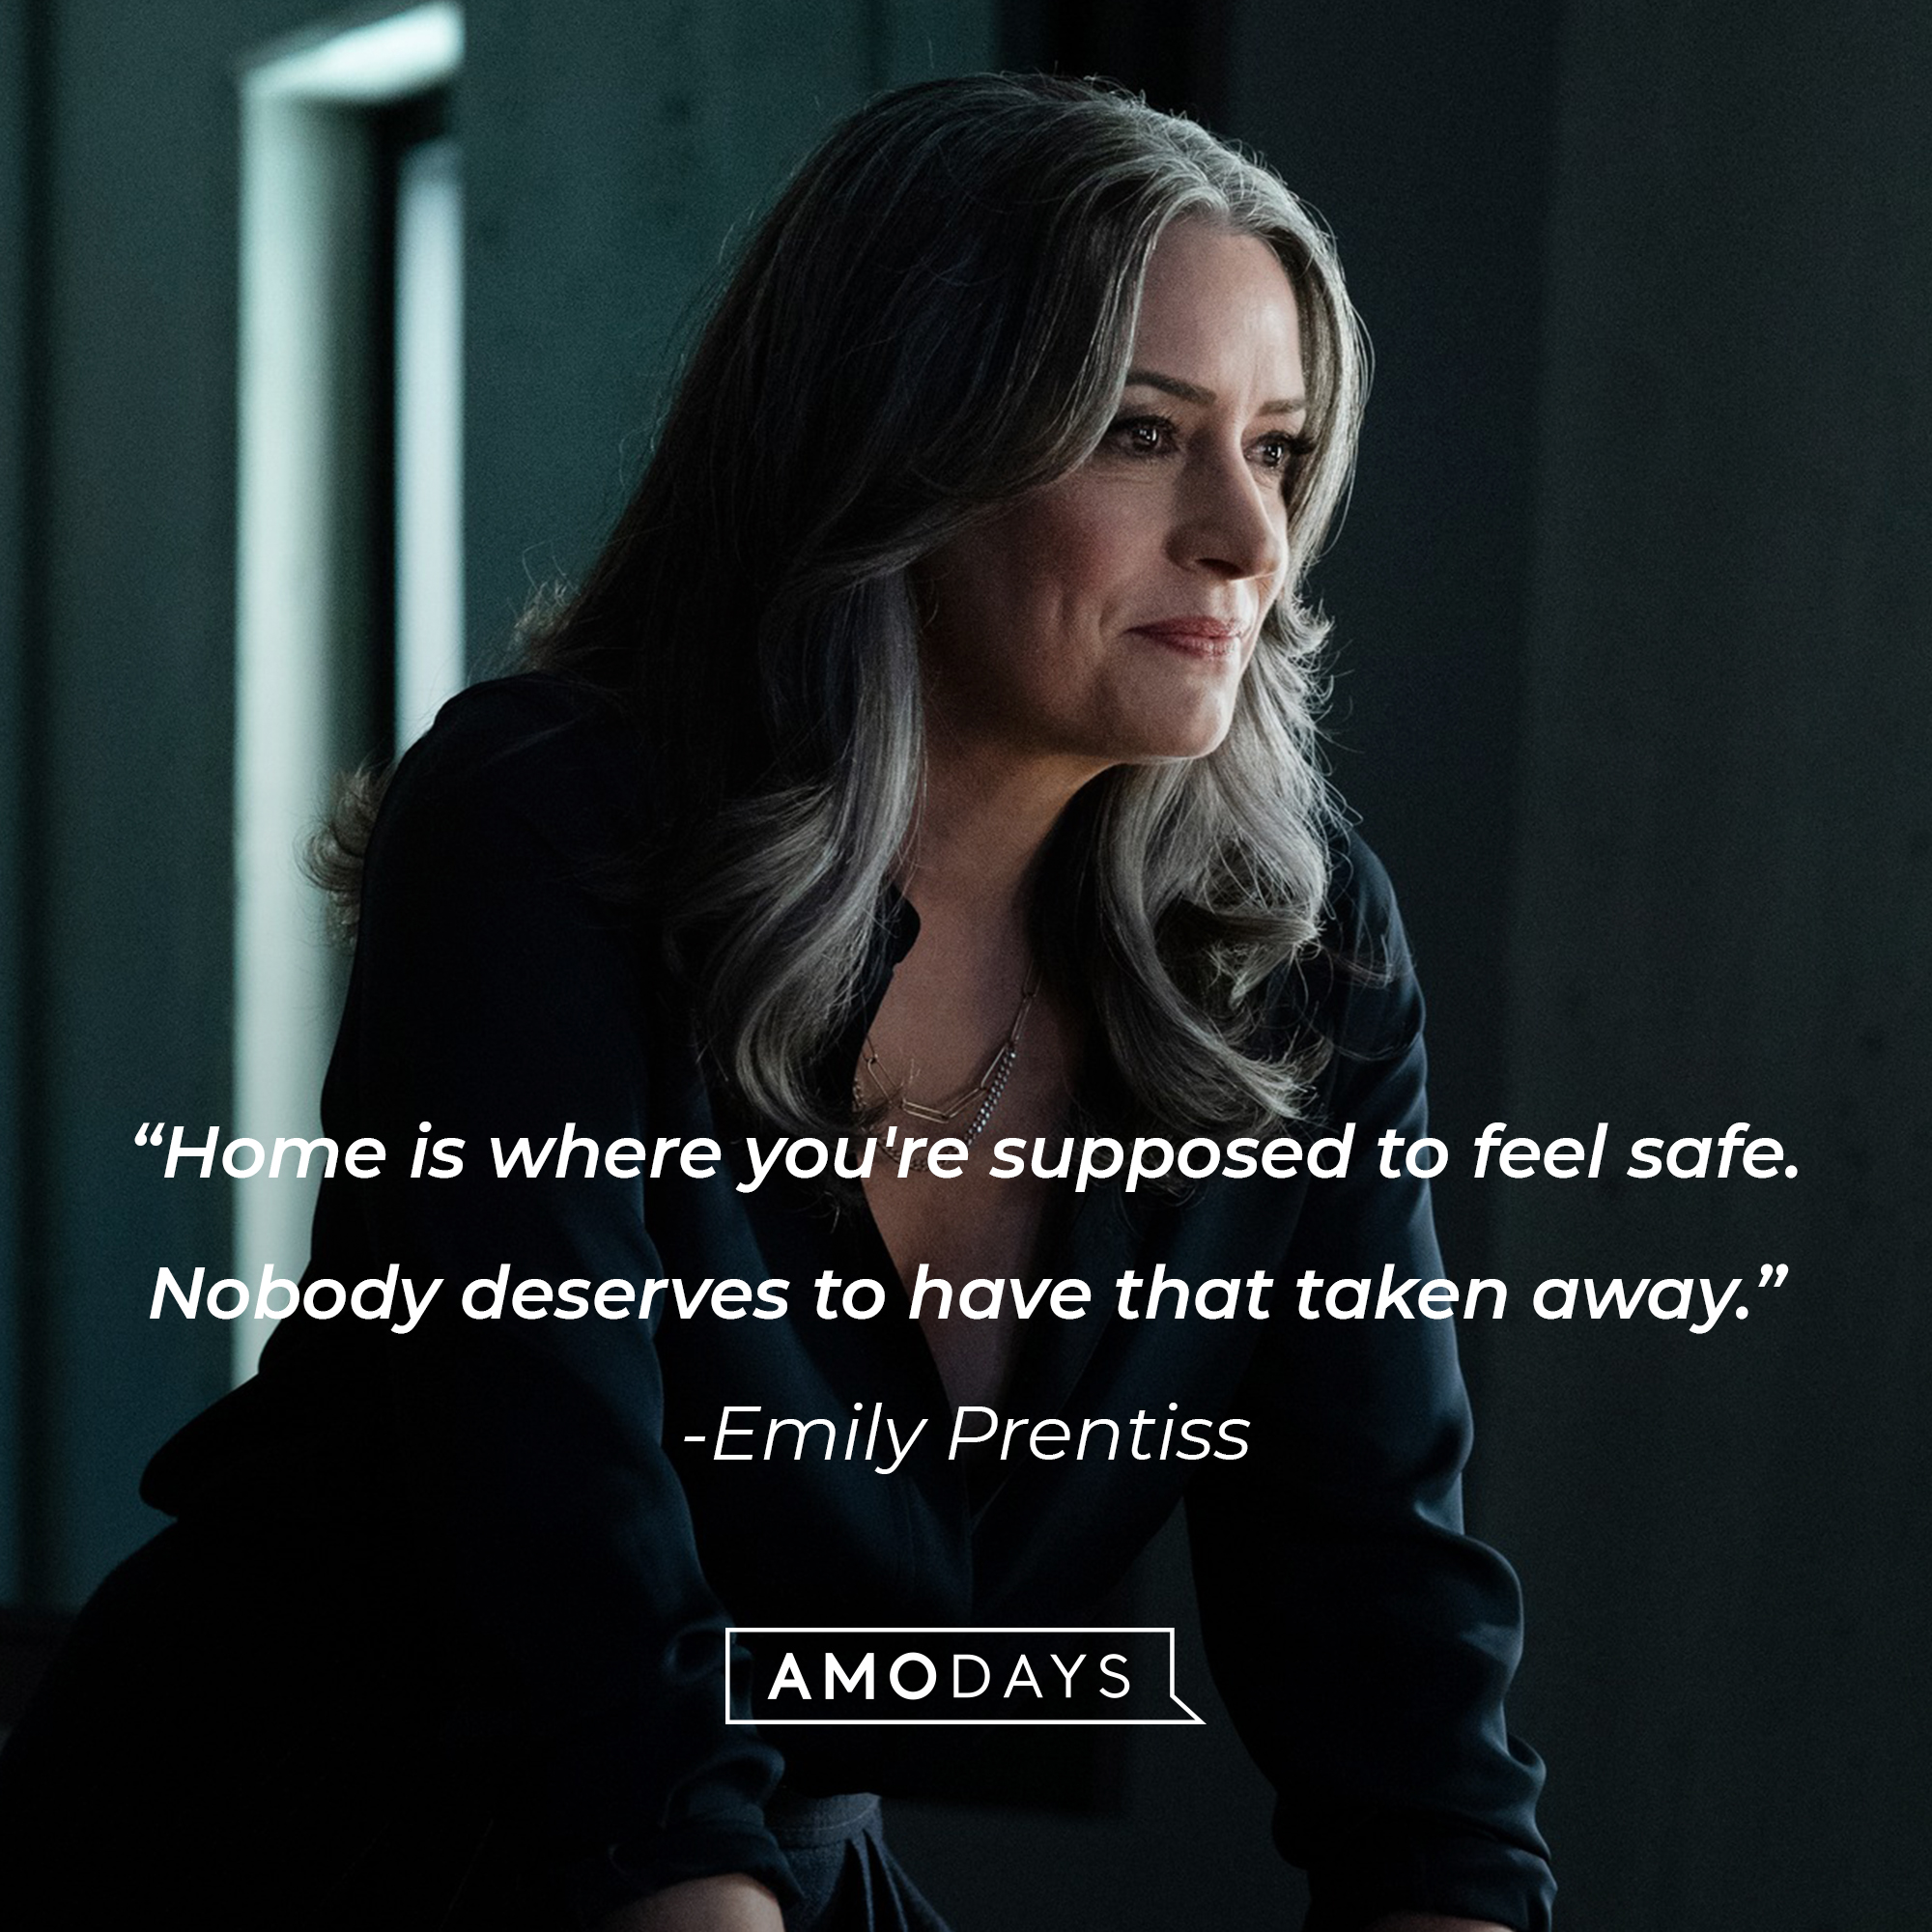 Emily Prentiss' quote: "Home is where you're supposed to feel safe. Nobody deserves to have that taken away." | Source: Facebook.com/CriminalMinds